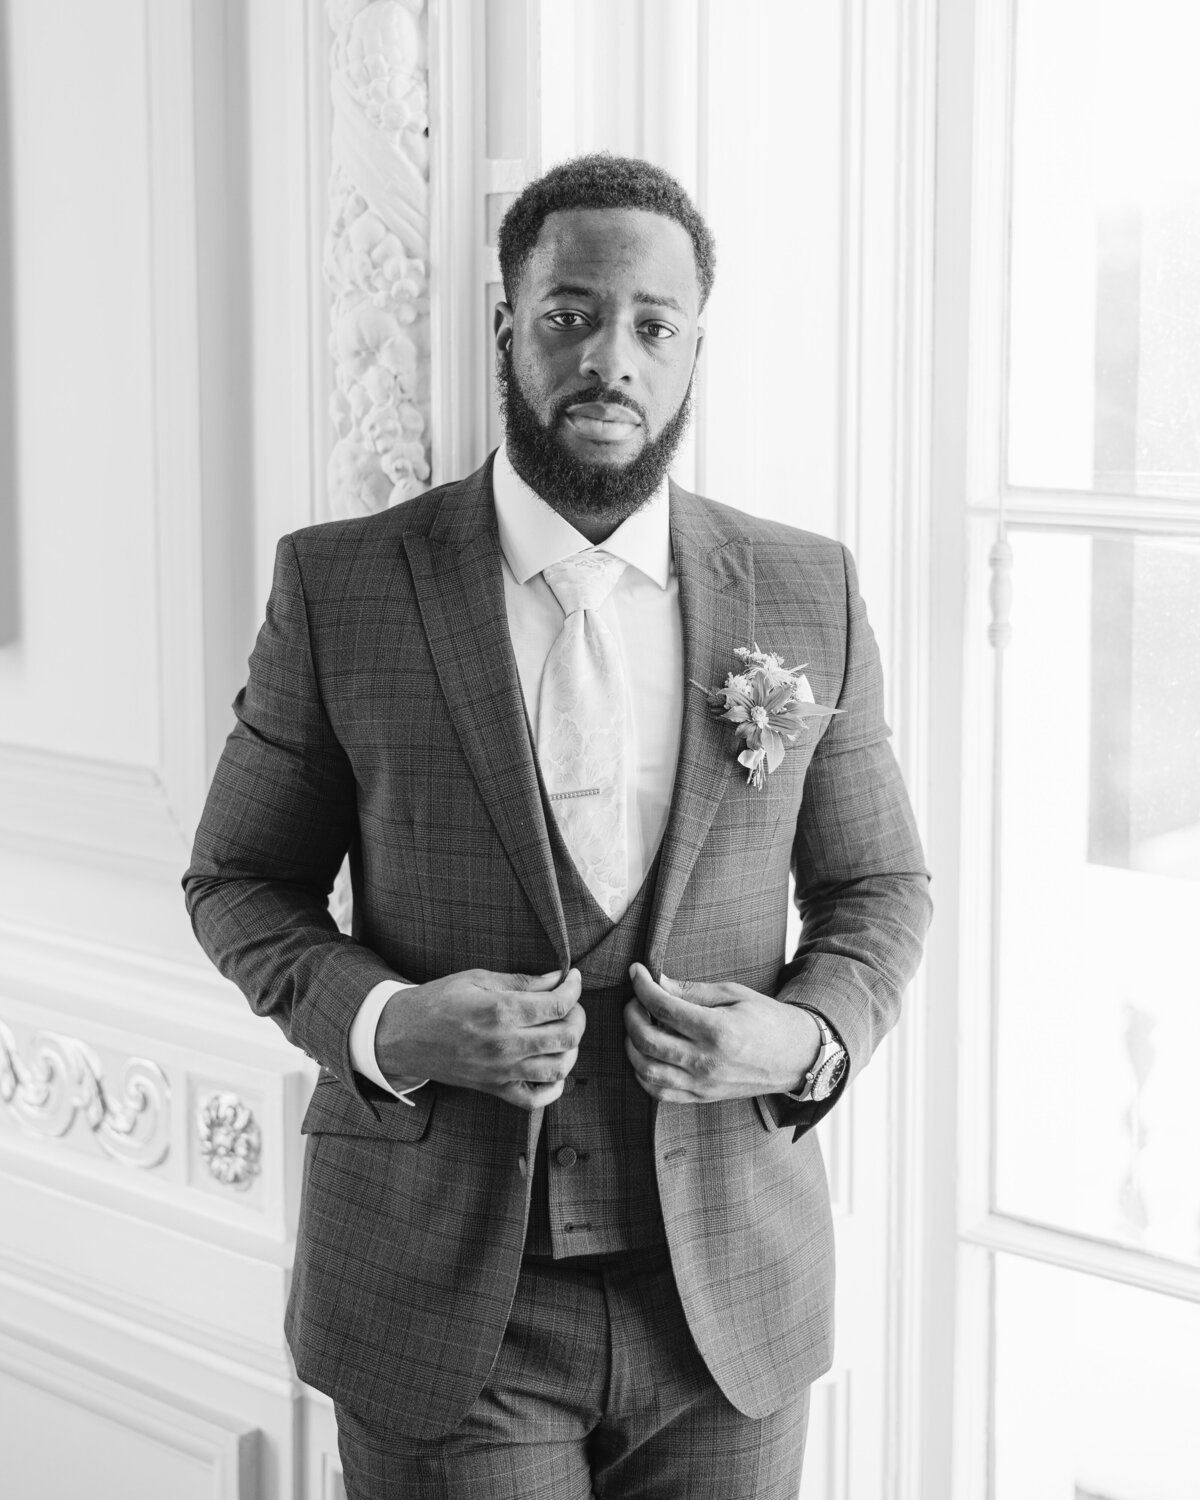 Black and white portrait and groom at 10-11 Carlton House Terrace wedding venue in London